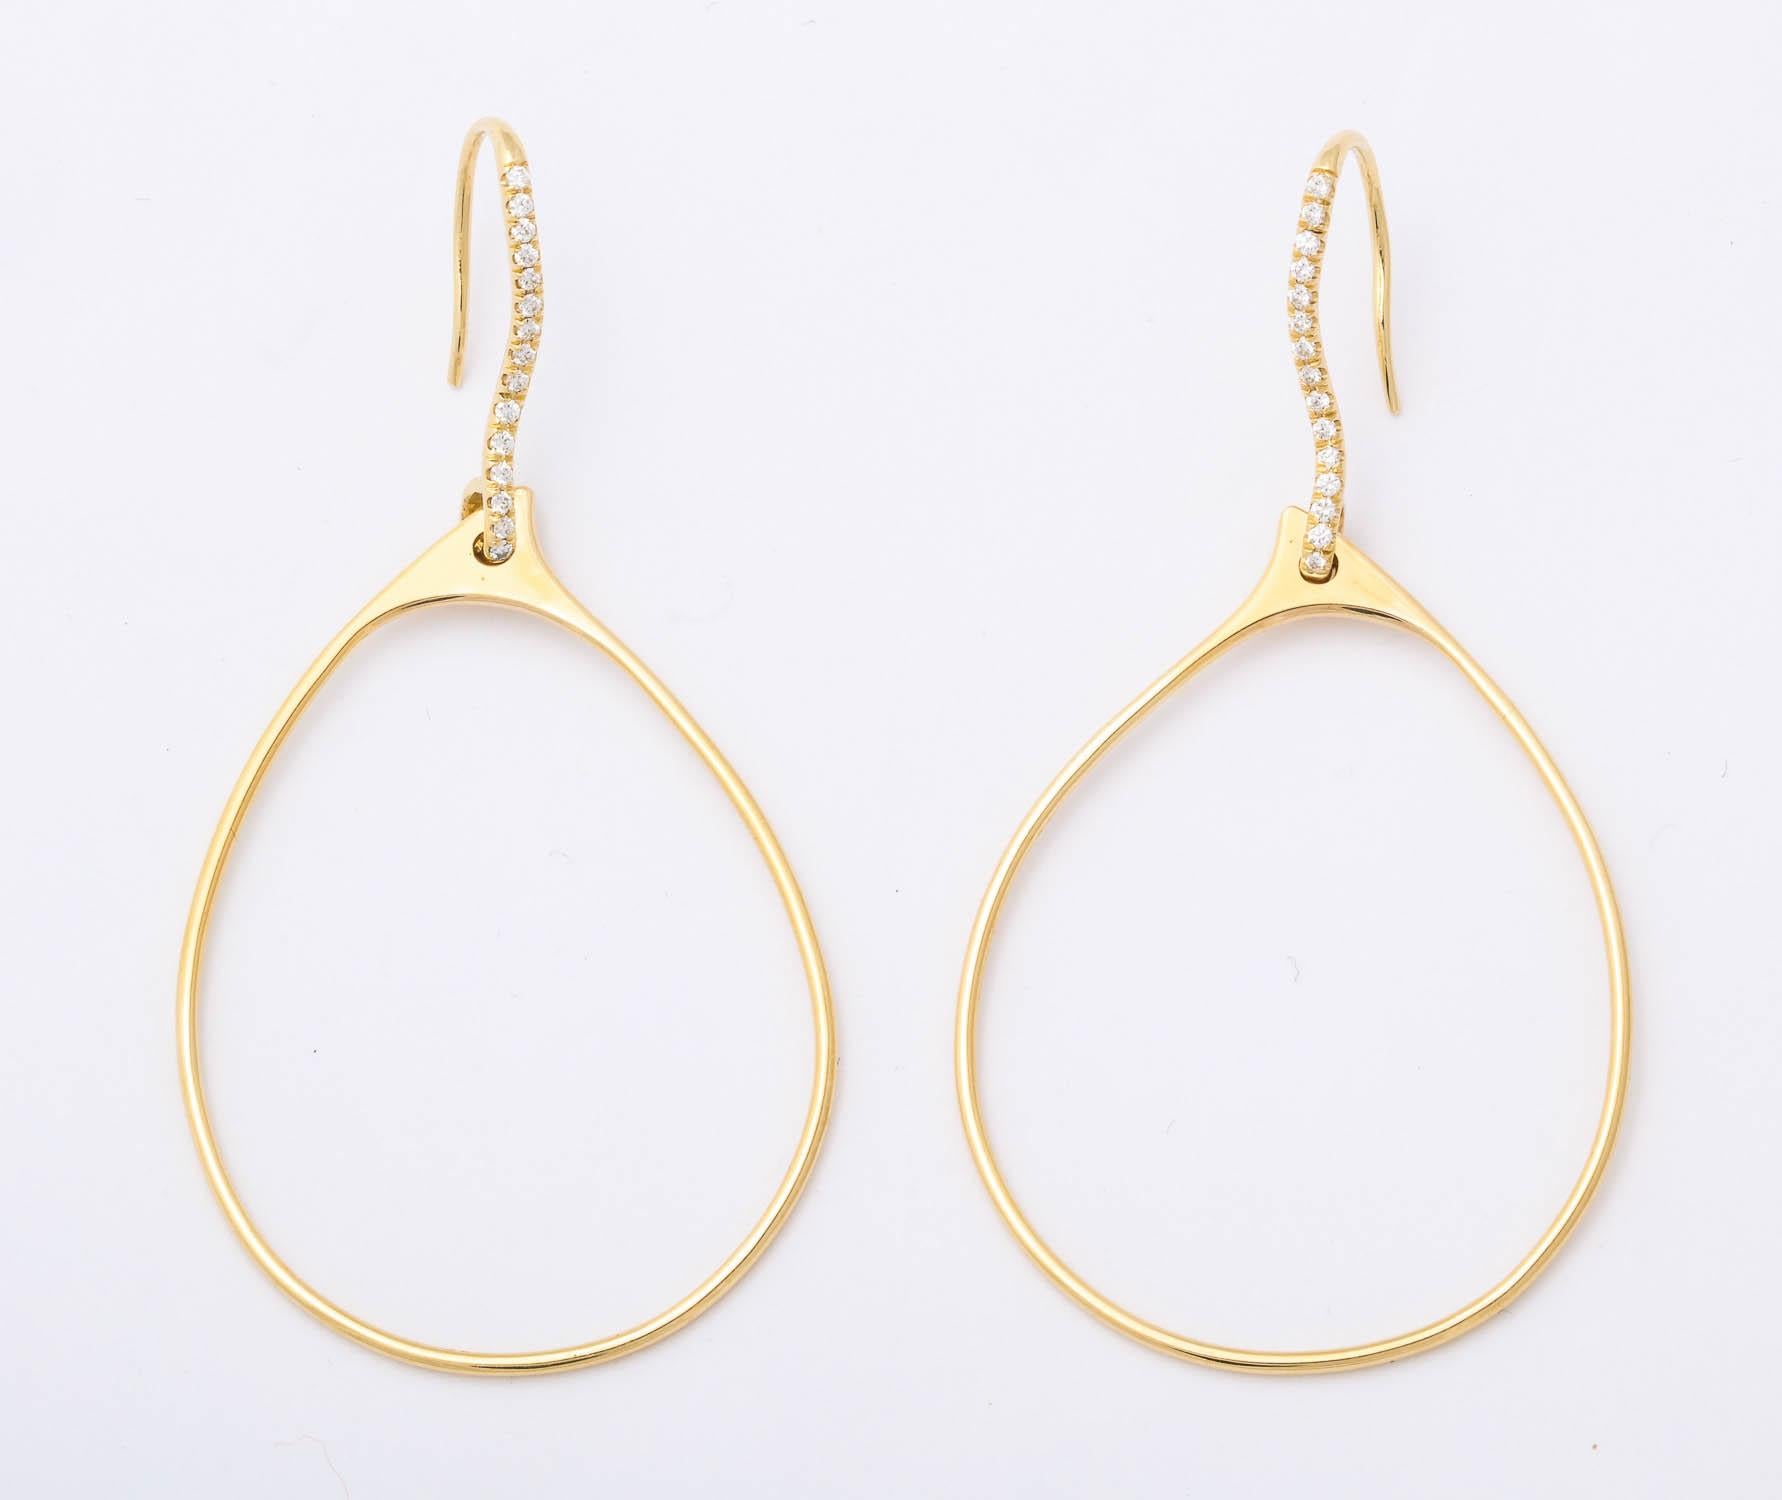 contemporary 18k yellow gold organic shaped hoop earrings on bead set diamond wires containing 30 full cut round diamonds weighing approximately 0.30 ct. total weight
